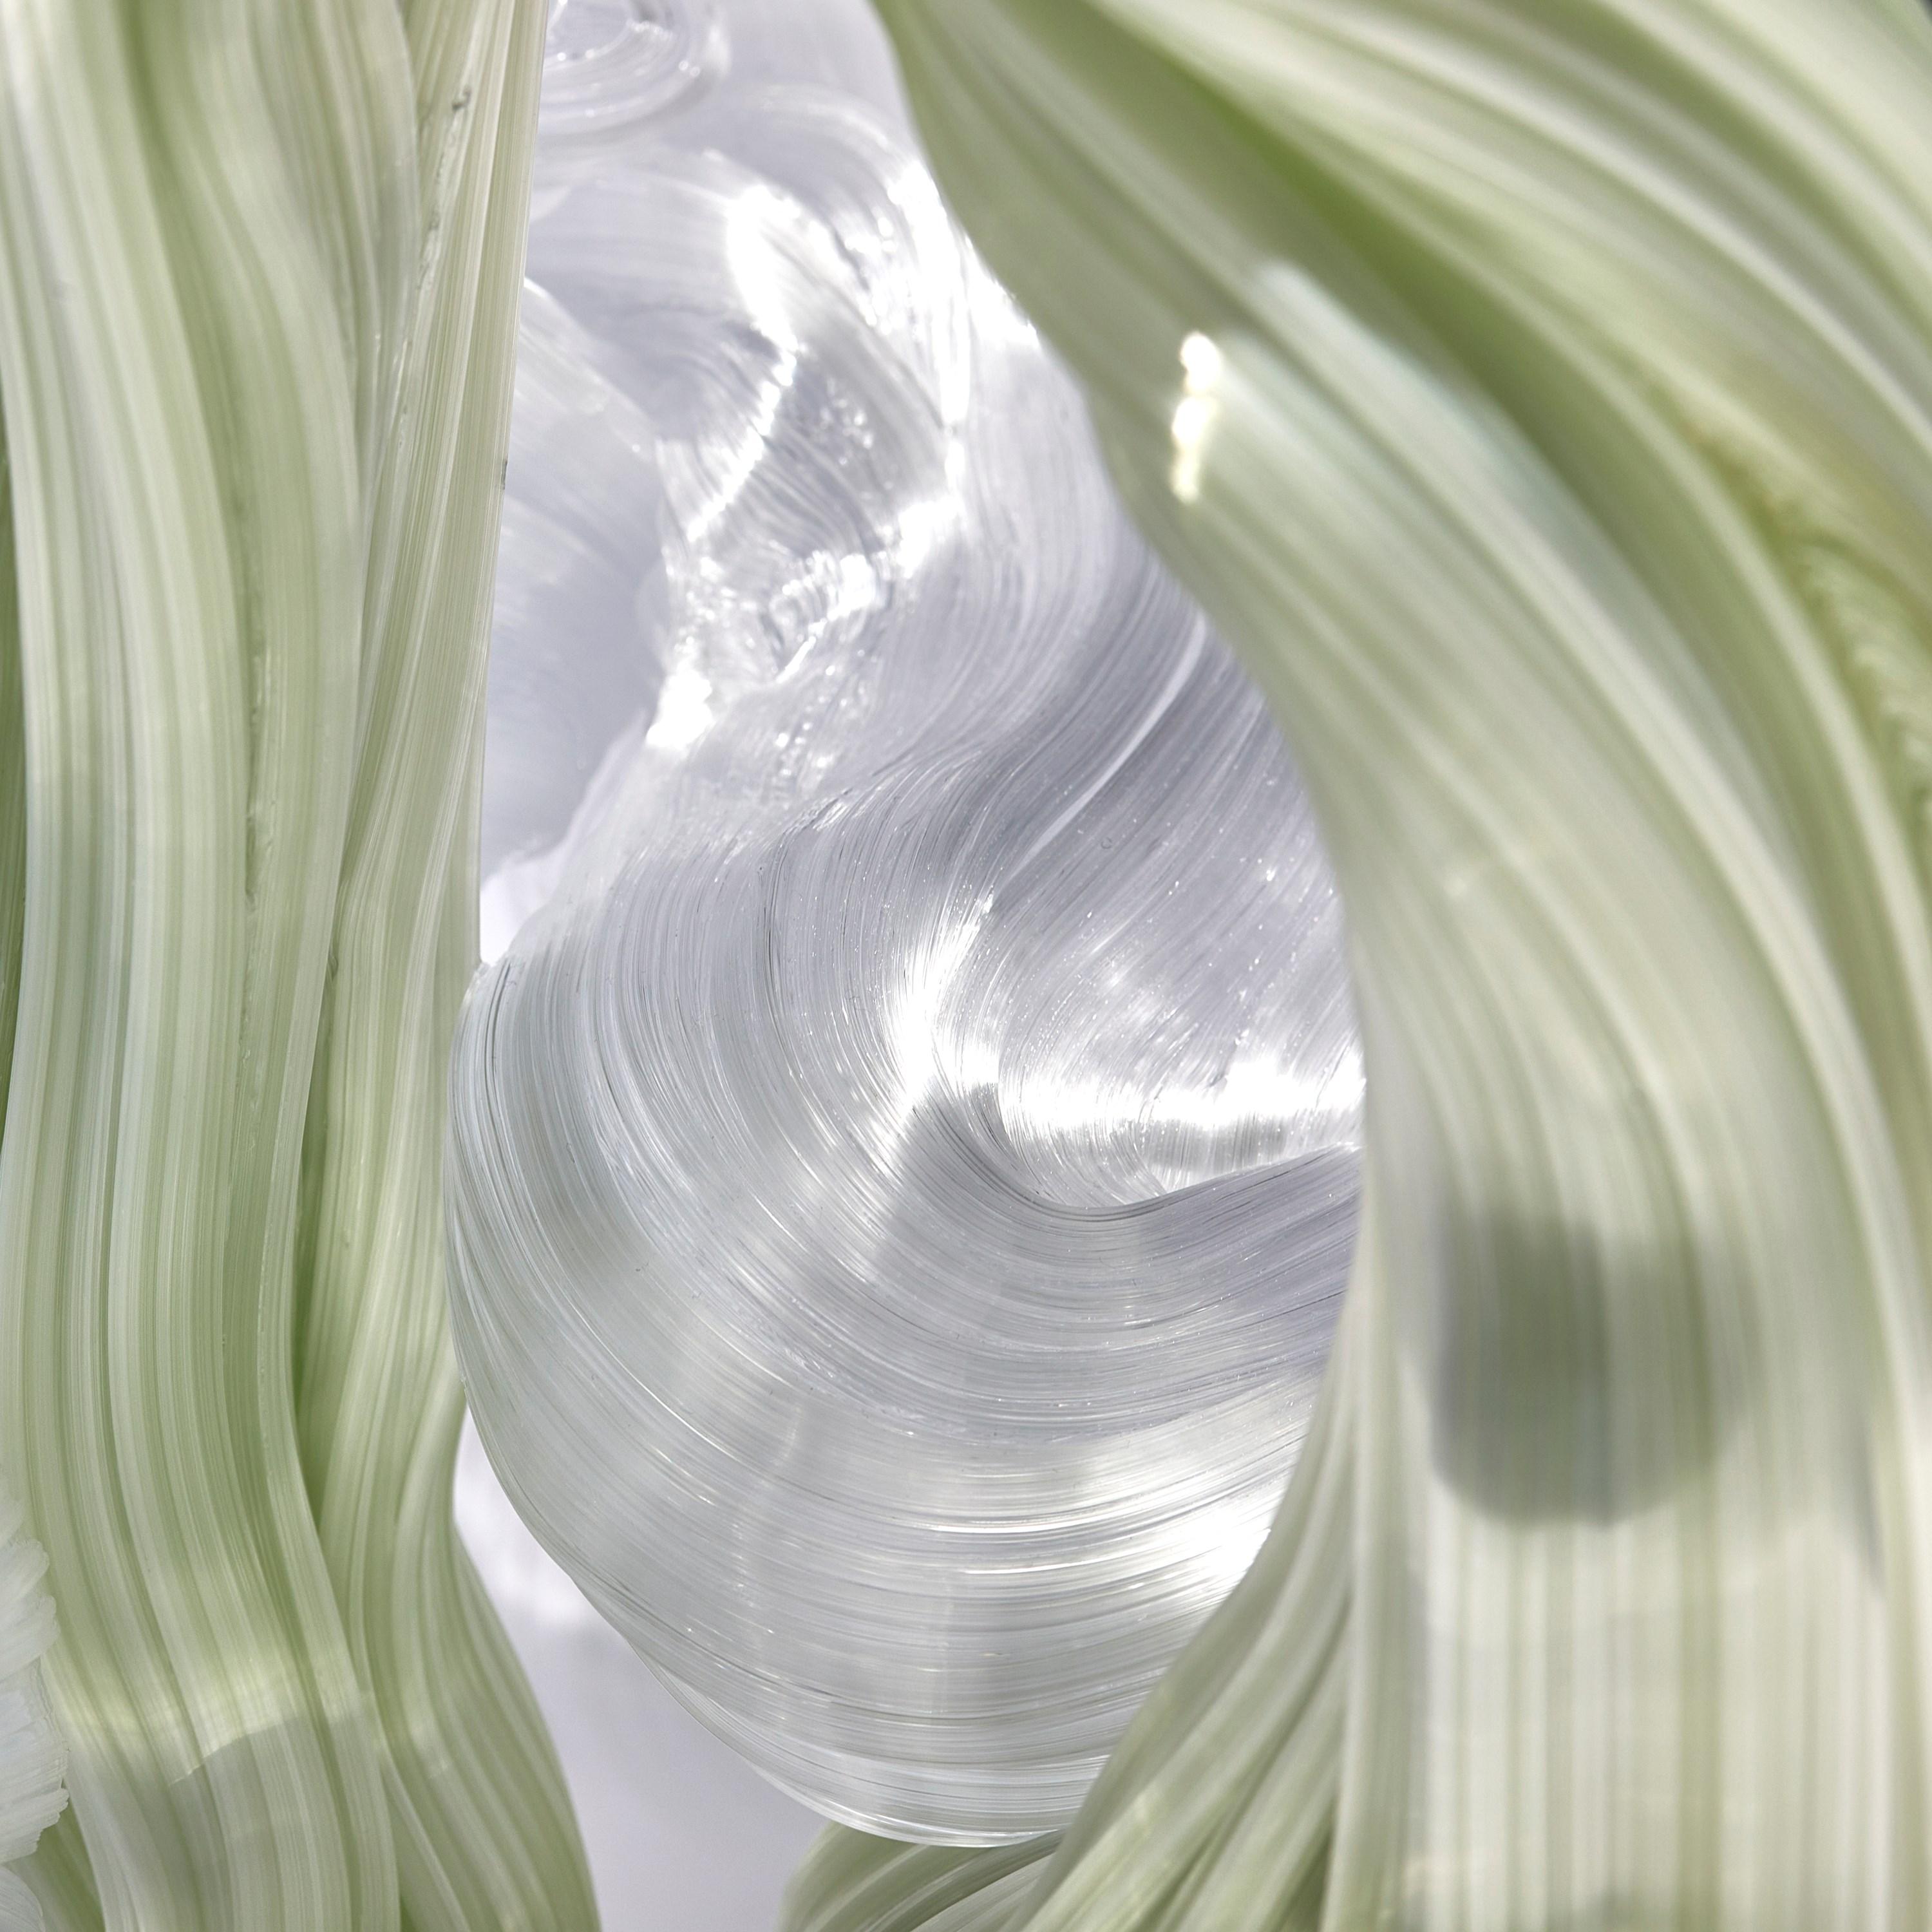 Contemporary Community, abstract white & soft lime green glass artwork by Maria Bang Espersen